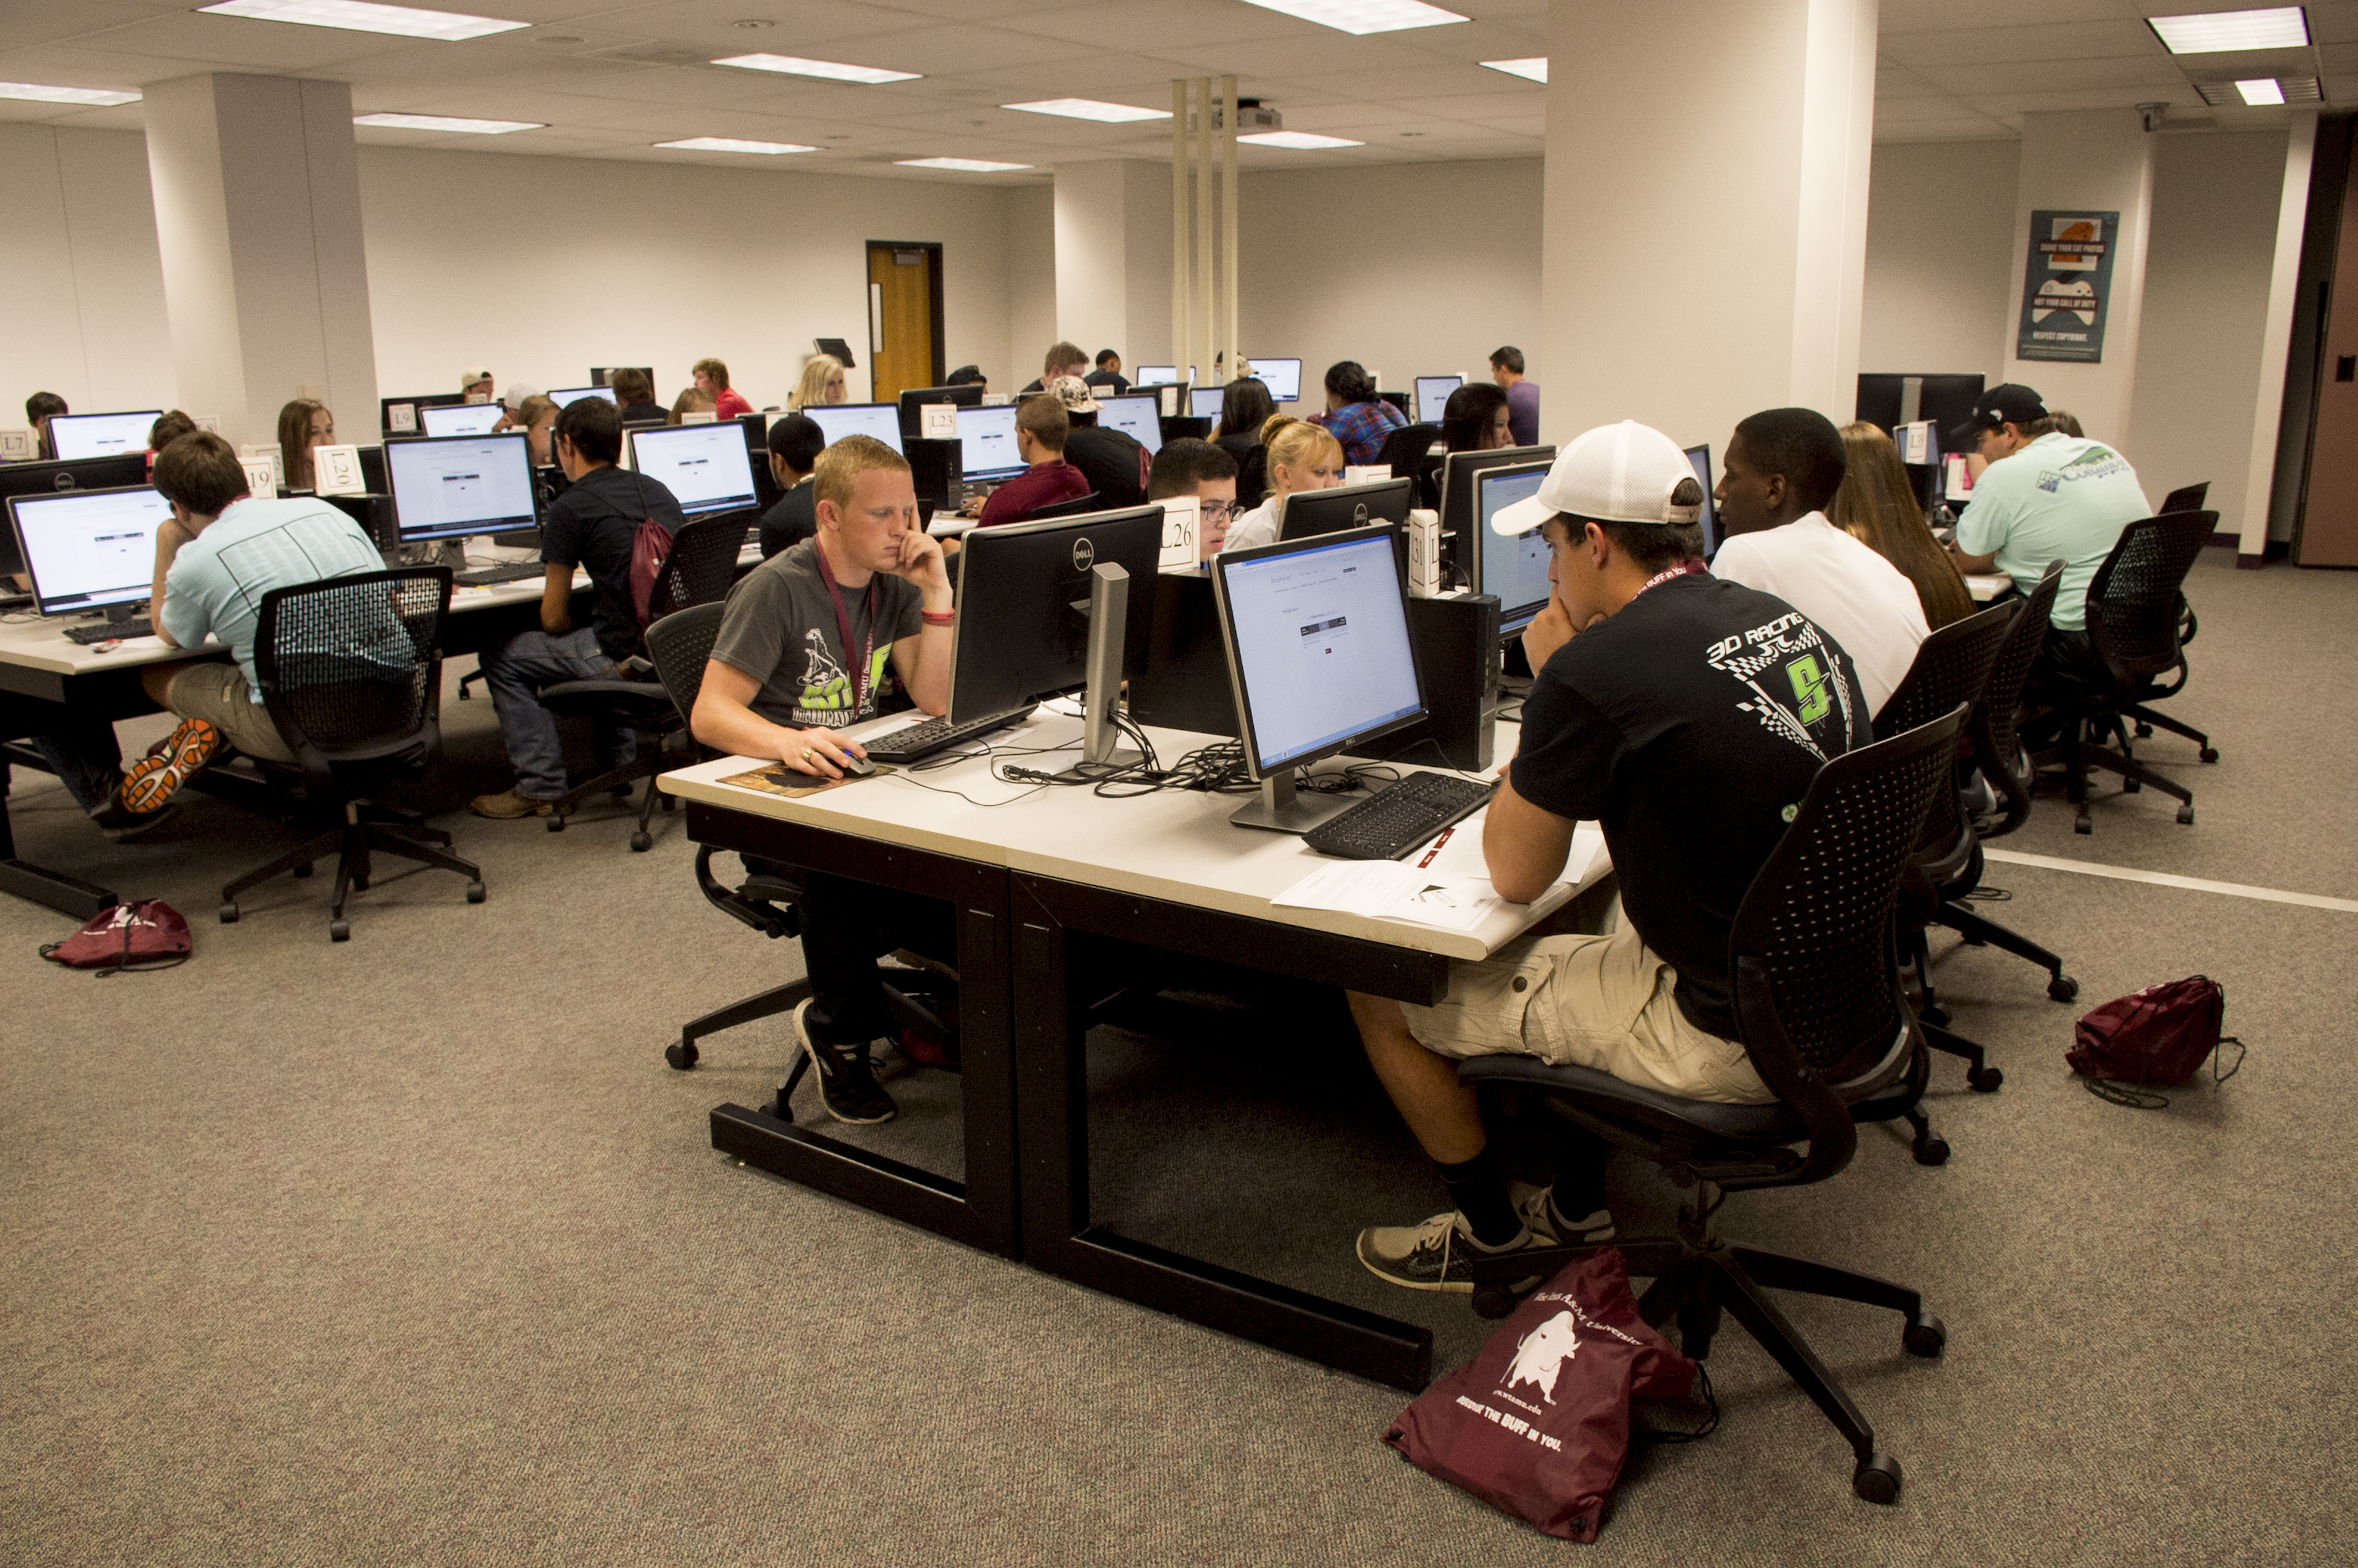 Students work on computers in the Hastings Electronic Learning Center.